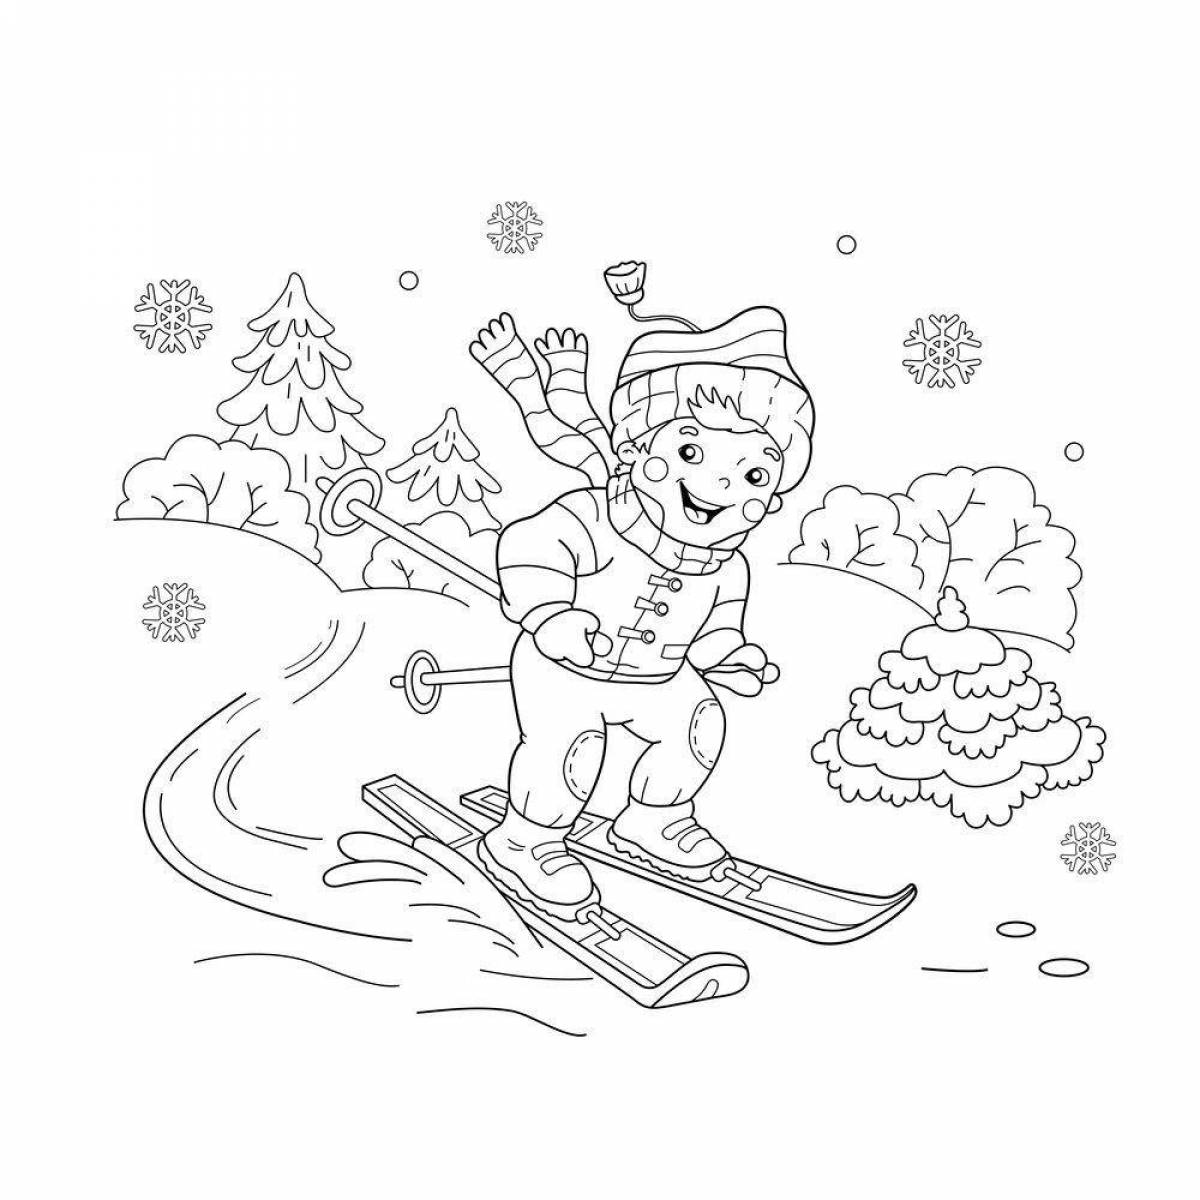 Fabulous coloring pages for kids on skis